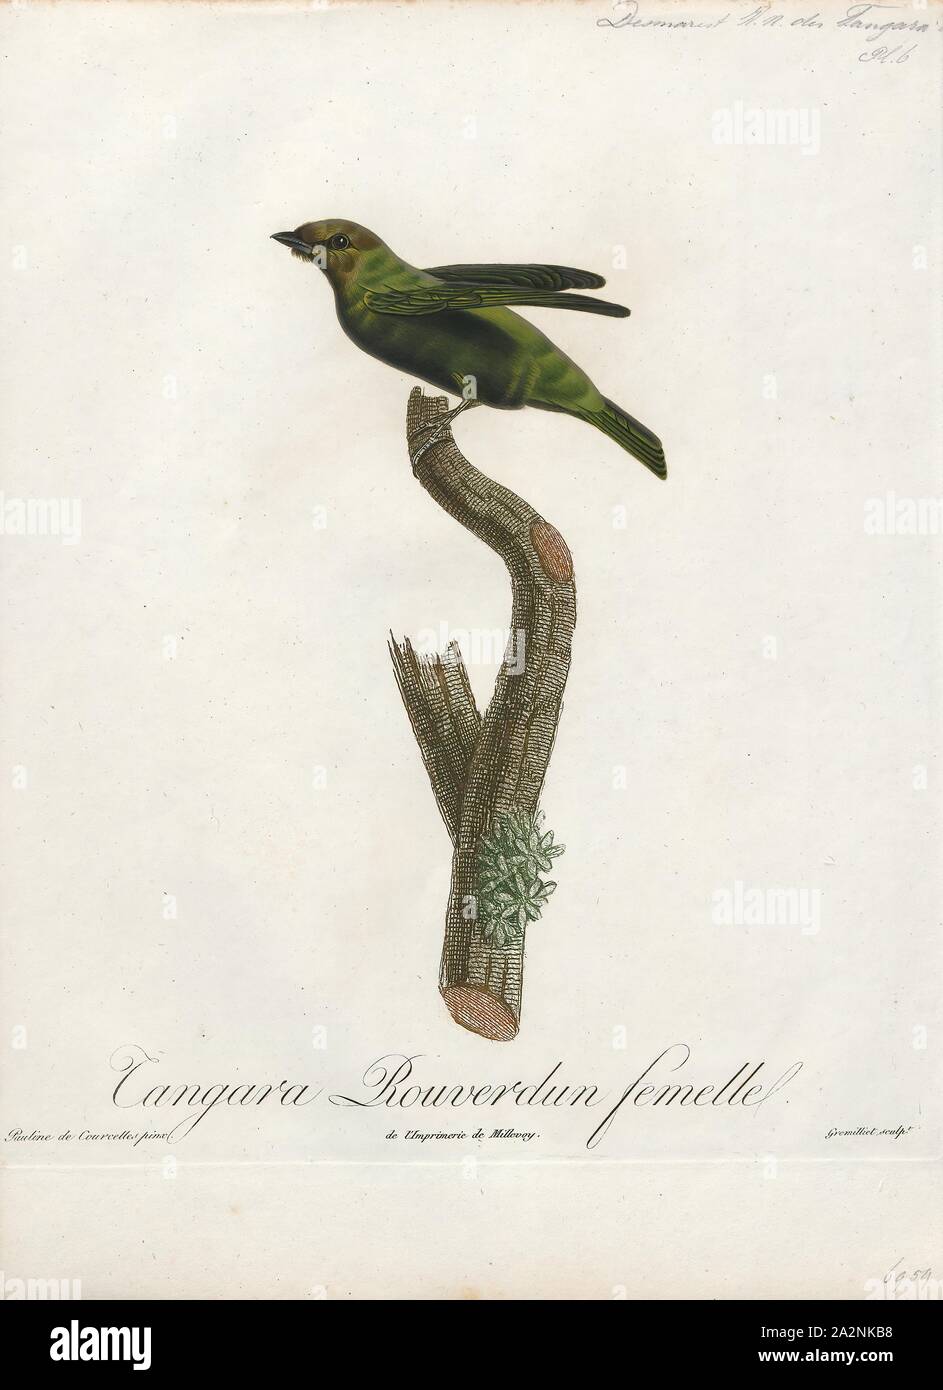 Tangara gyrola, Print, The bay-headed tanager (Tangara gyrola) is a medium-sized passerine bird. This tanager is a resident breeder in Costa Rica, Panama, South America south to Ecuador, Bolivia and southern Brazil, and on Trinidad., 1805 Stock Photo